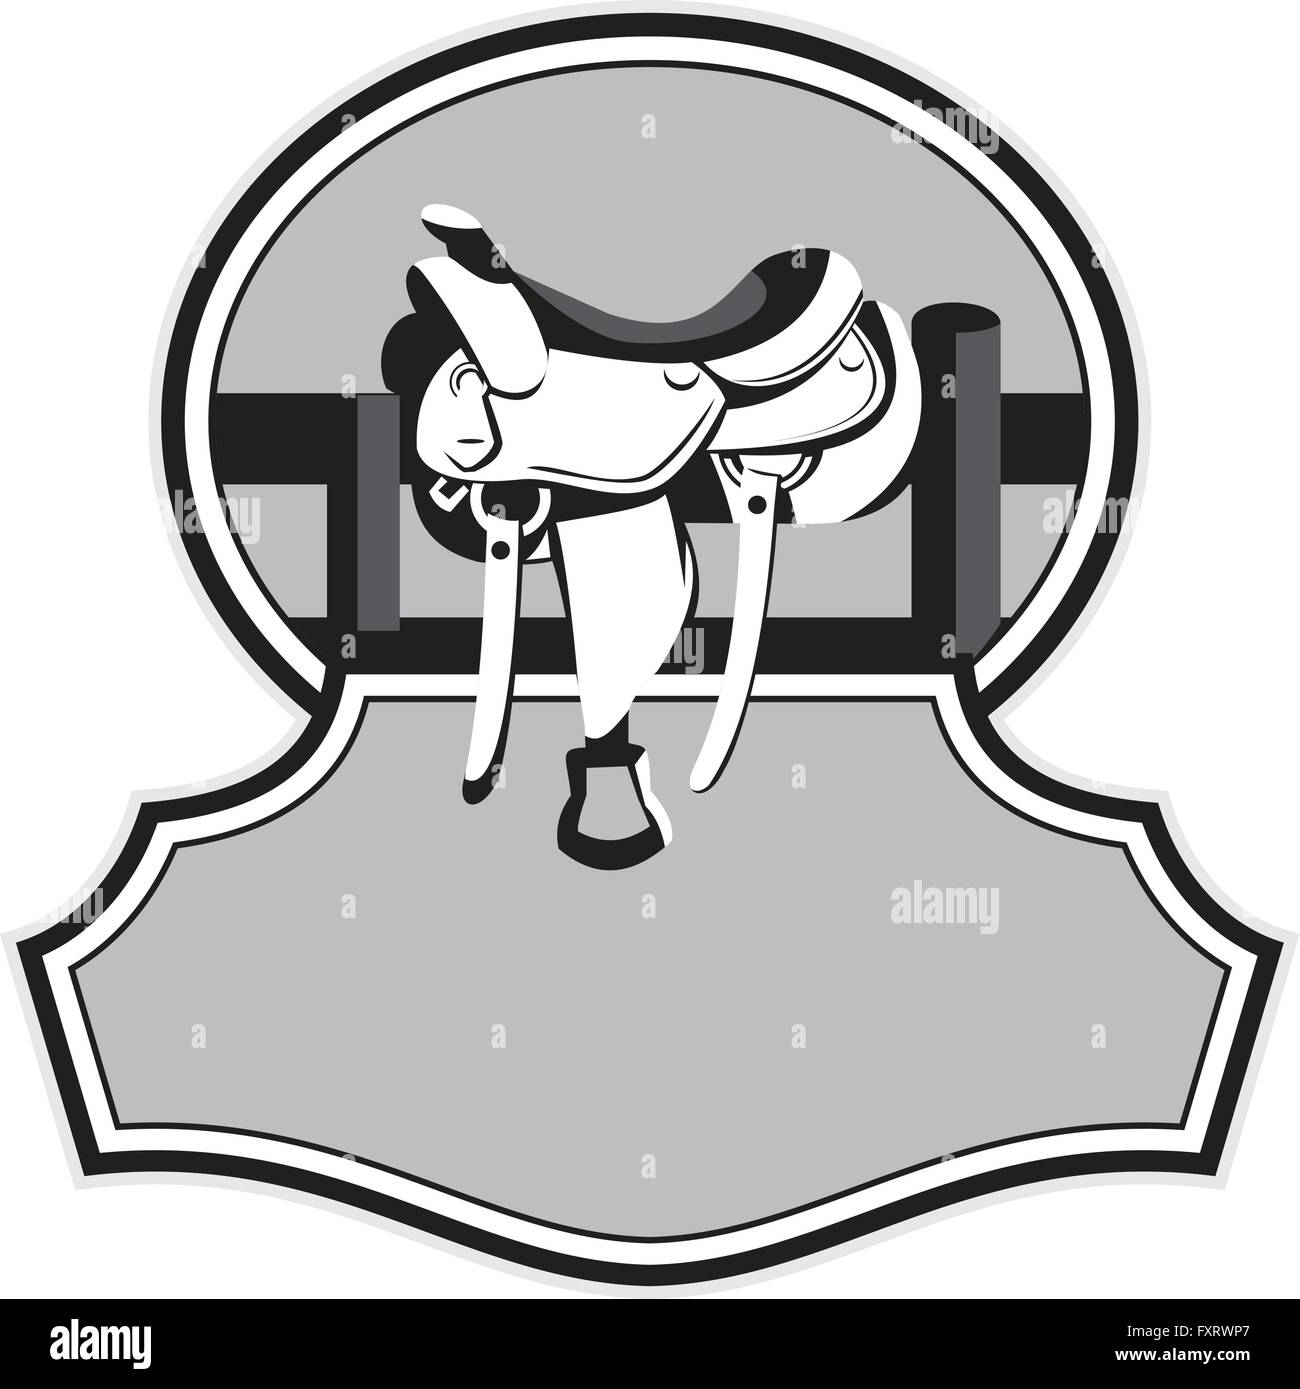 Illustration of a modern western saddle on ranch fence set inside oval shape with banner in front in black and white done in retro style. Stock Vector